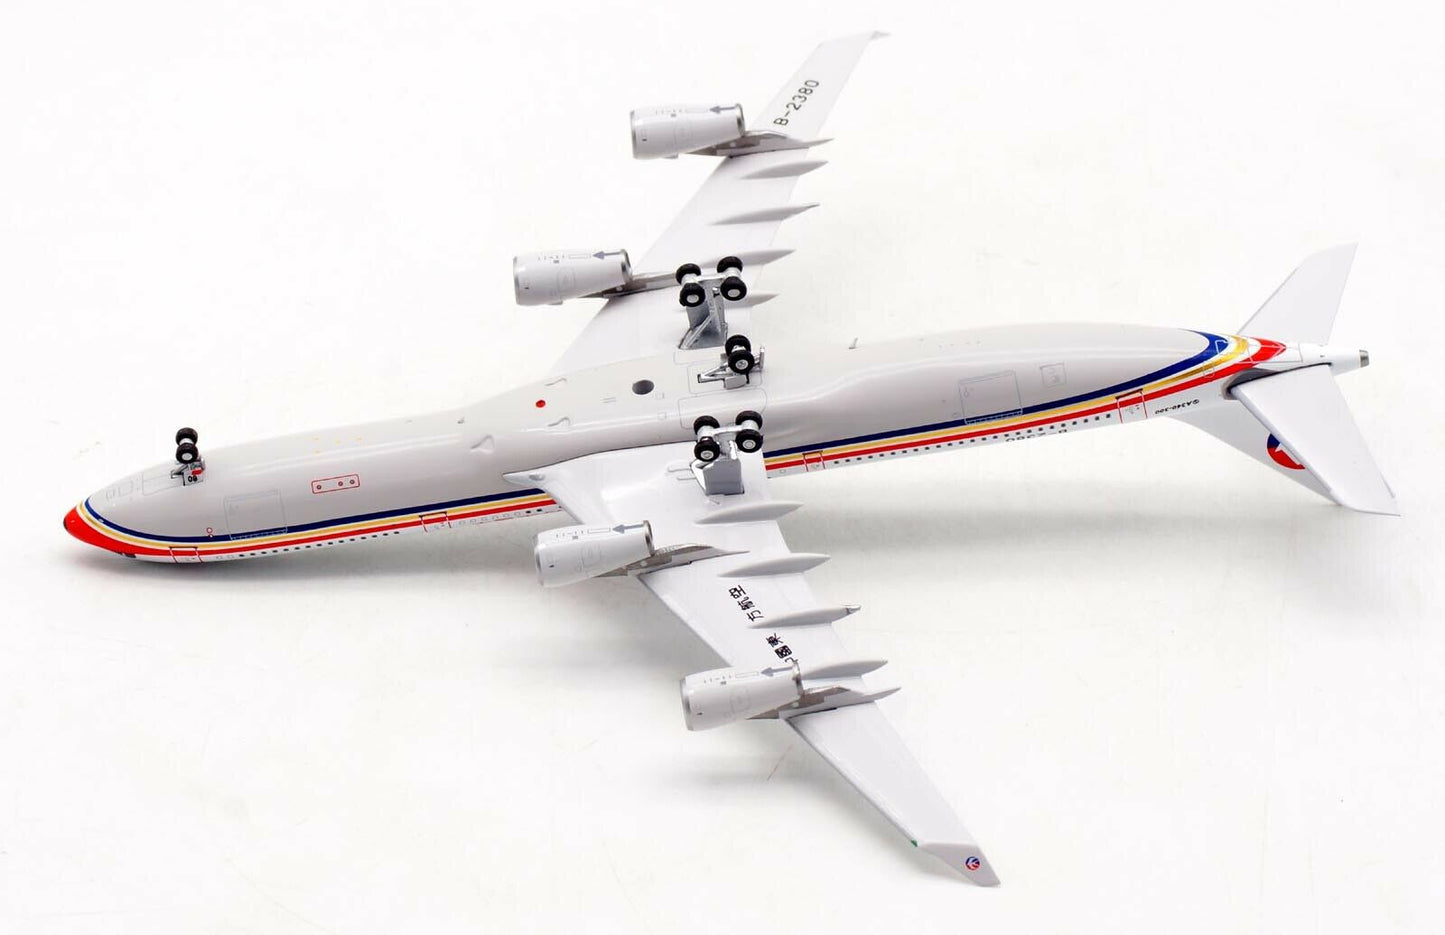 1:400 Aviation400 China Eastern Airlines Airbus A340-300 B-2380 AV4081